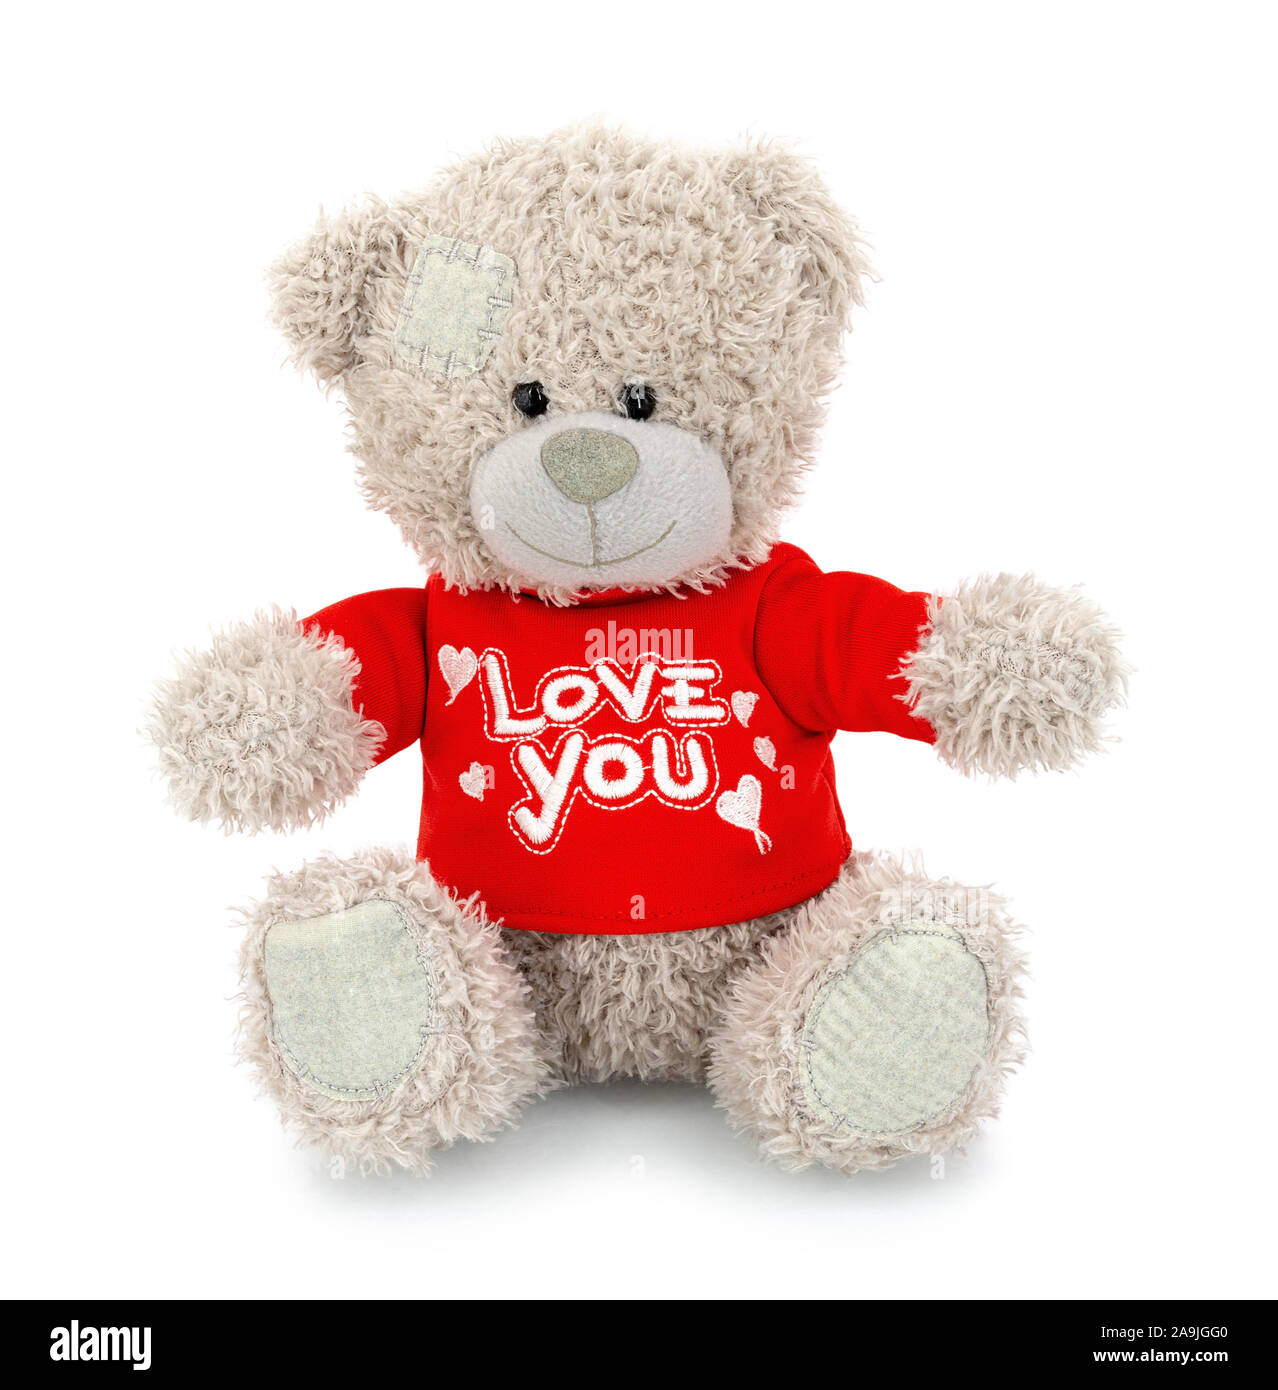 Cute bear doll with red LOVE YOU shirt isolated on white background with shadow reflection. Playful bright brown bear sitting on white underlay. Teddy Stock Photo